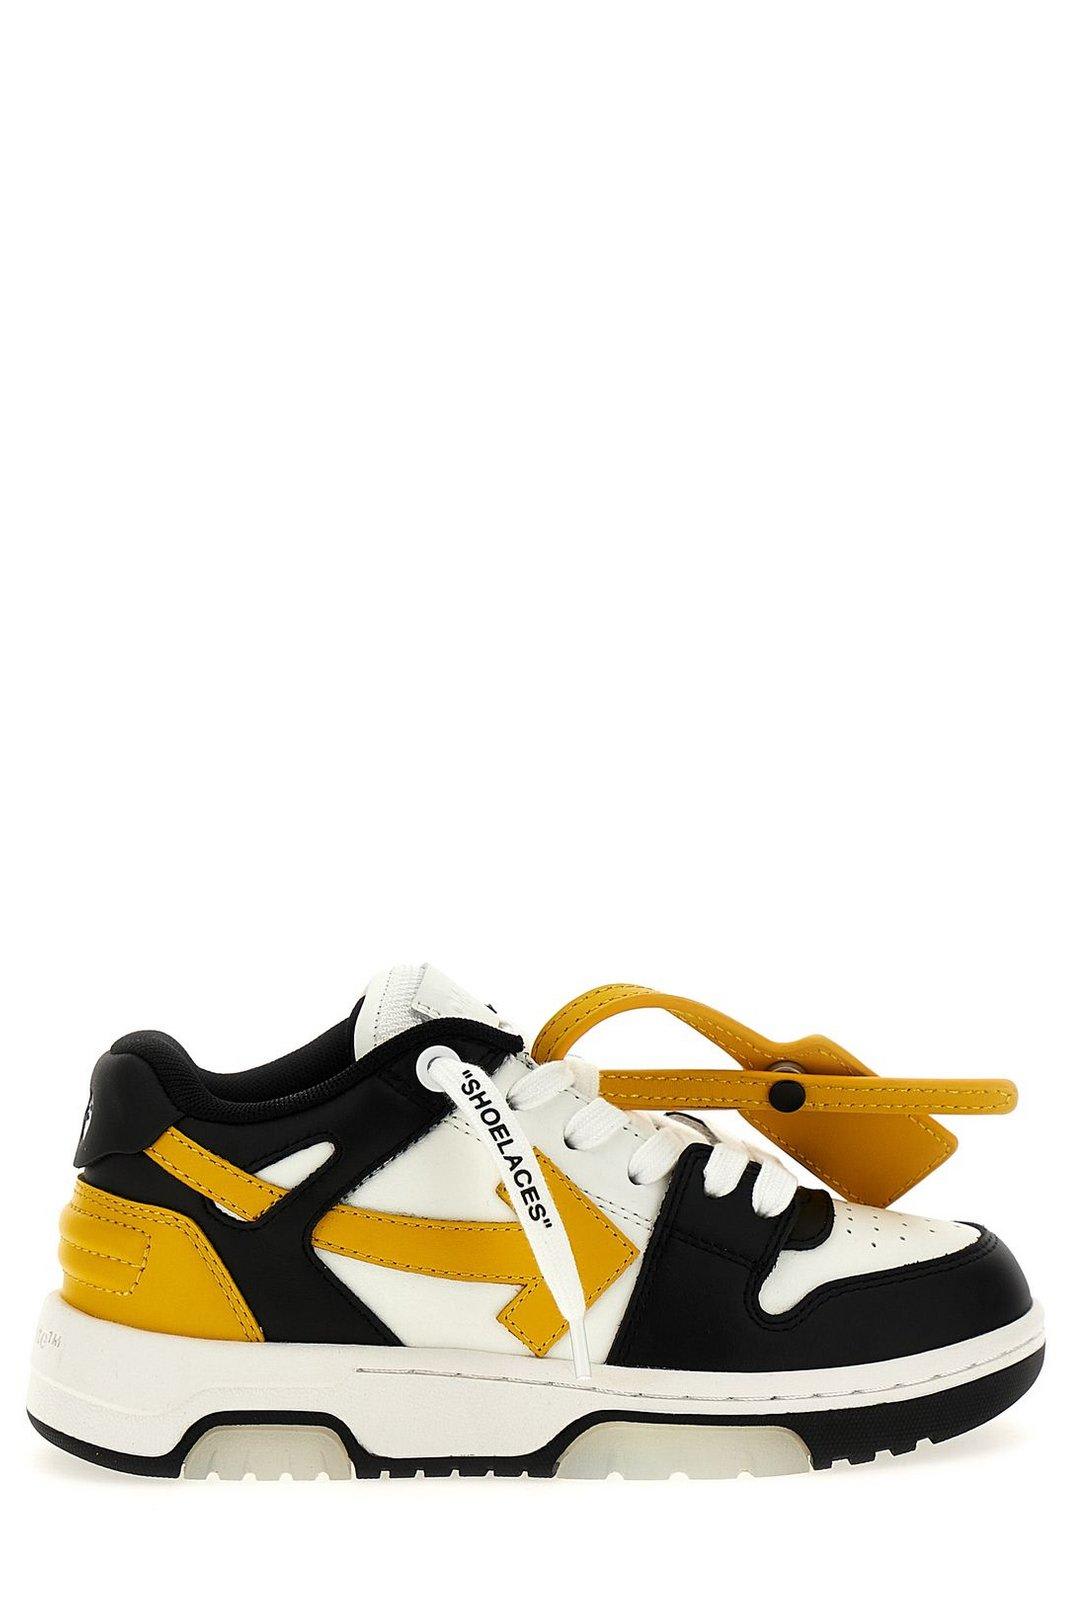 OFF-WHITE OUT OF OFFICE ROUND TOE SNEAKERS